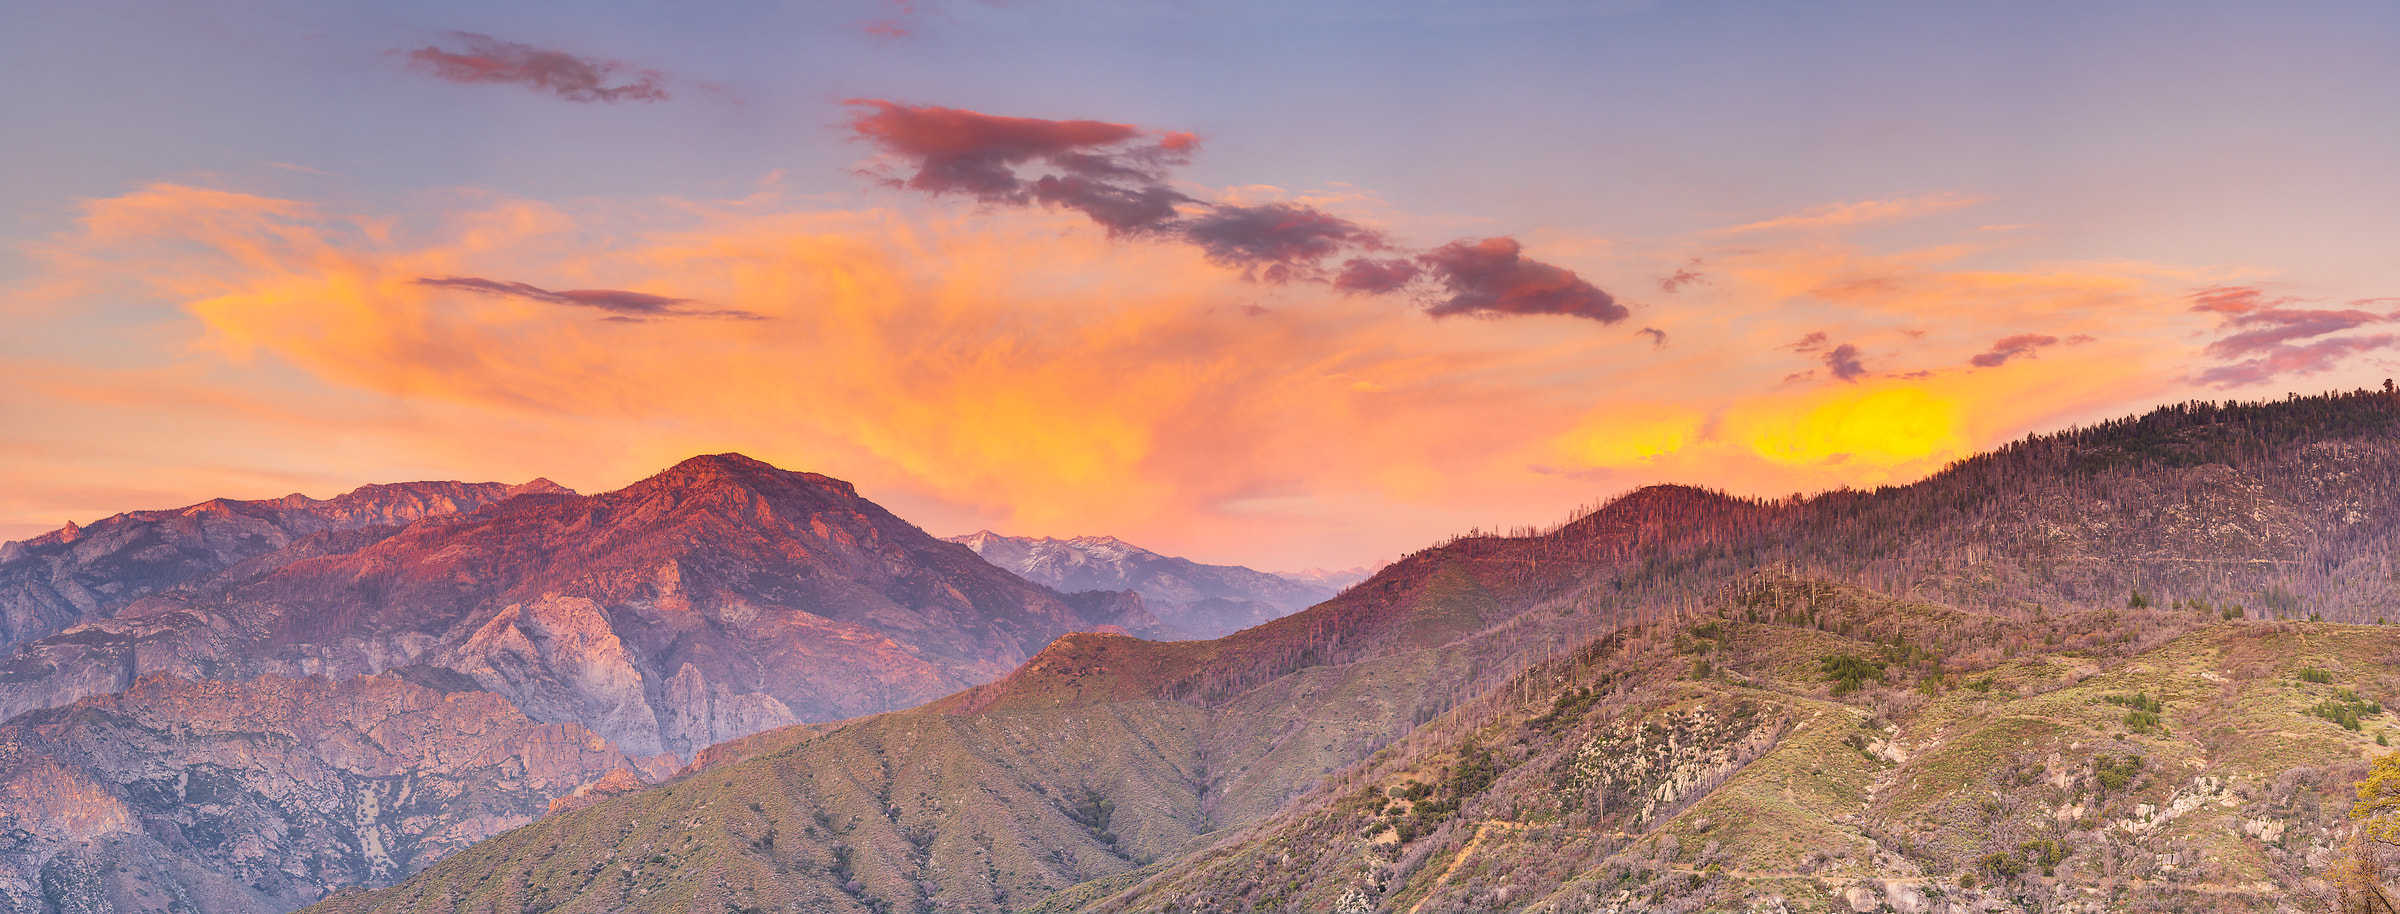 776 megapixels! A very high resolution, large-format VAST photo print of a bright sunset over a landscape; photograph created by Chris Blake in Kings Canyon National Park, California.